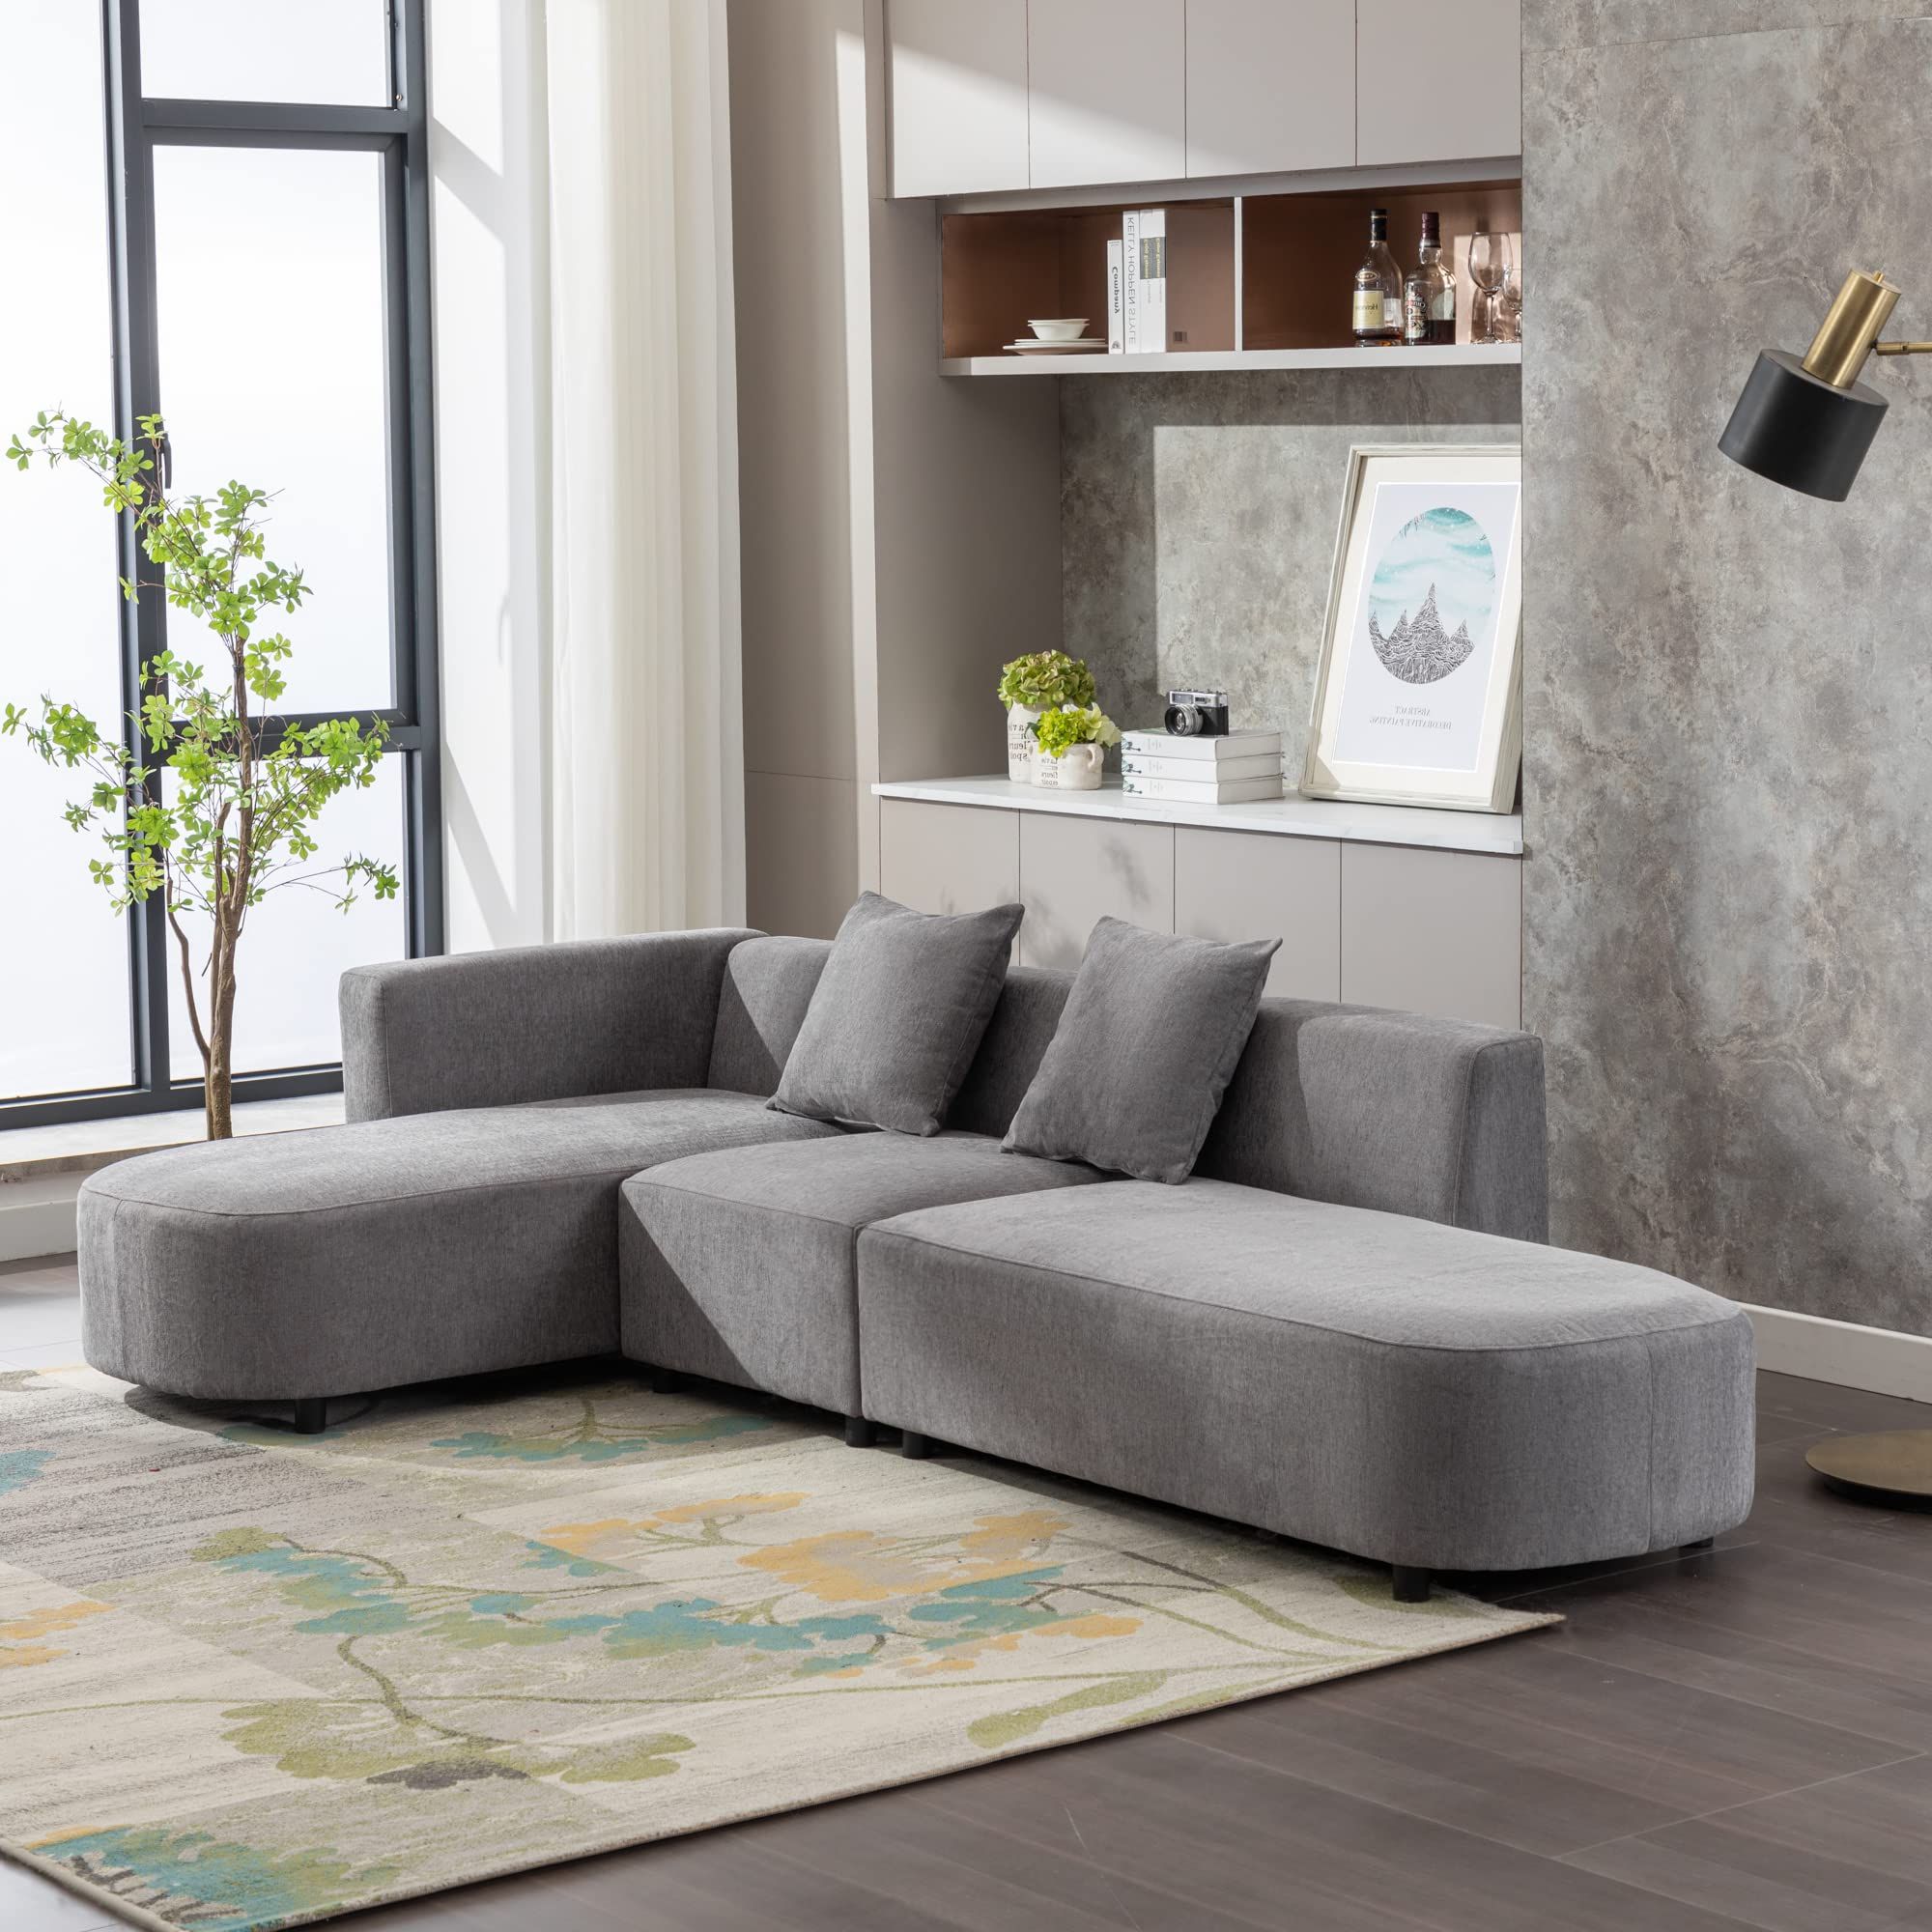 Popular 3 Piece Curved Sectional Set Pertaining To Amazon: Merax Luxury Modern Living Room Sofa Sectional Upholstery Couch  With Chaise 3 Piece Set, L Shape Love Seats, Gray : Home & Kitchen (Photo 13 of 15)